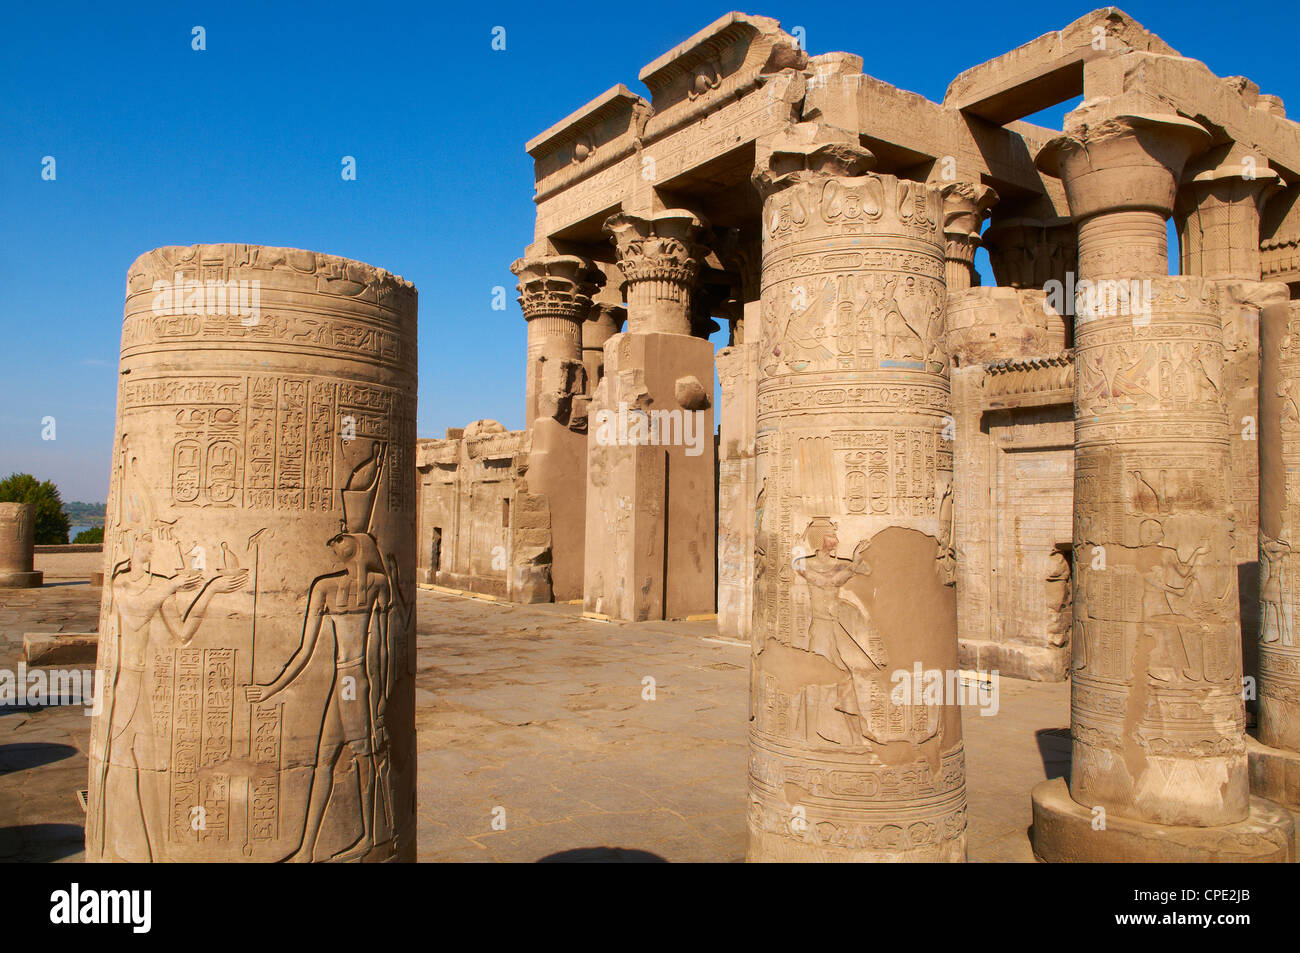 Temple of Sobek and Haroeris, Kom Ombo, Egypt, North Africa, Africa Stock Photo